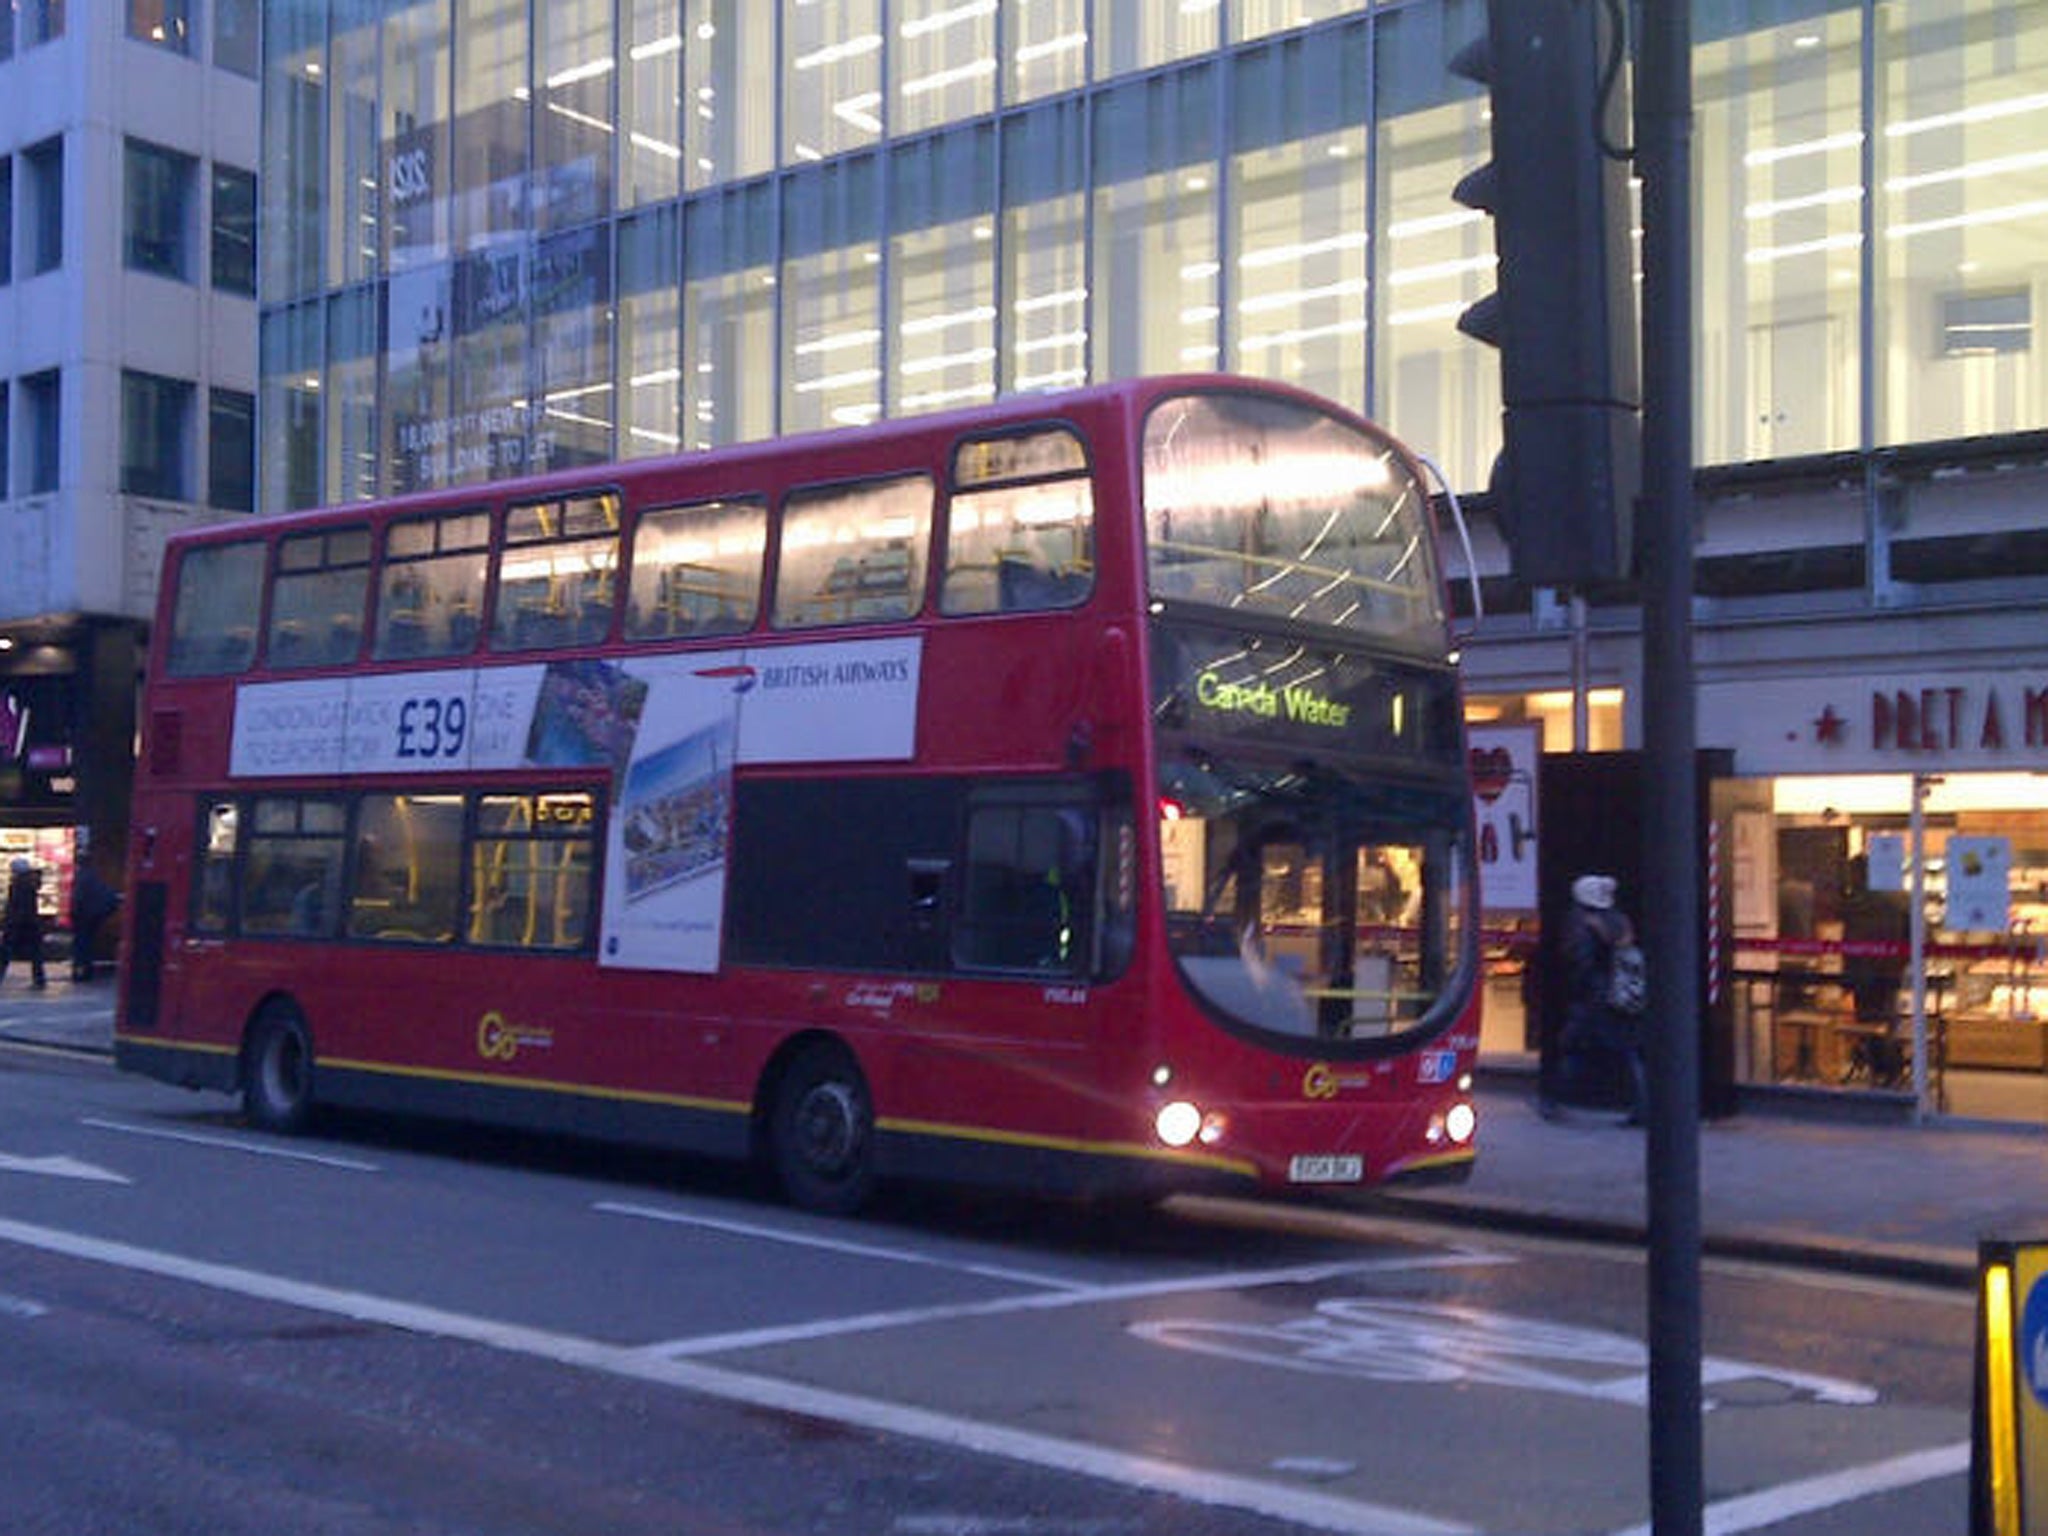 An empty No 1 to Canada Water near Holborn, but buses were rammed later in High Street Kensington